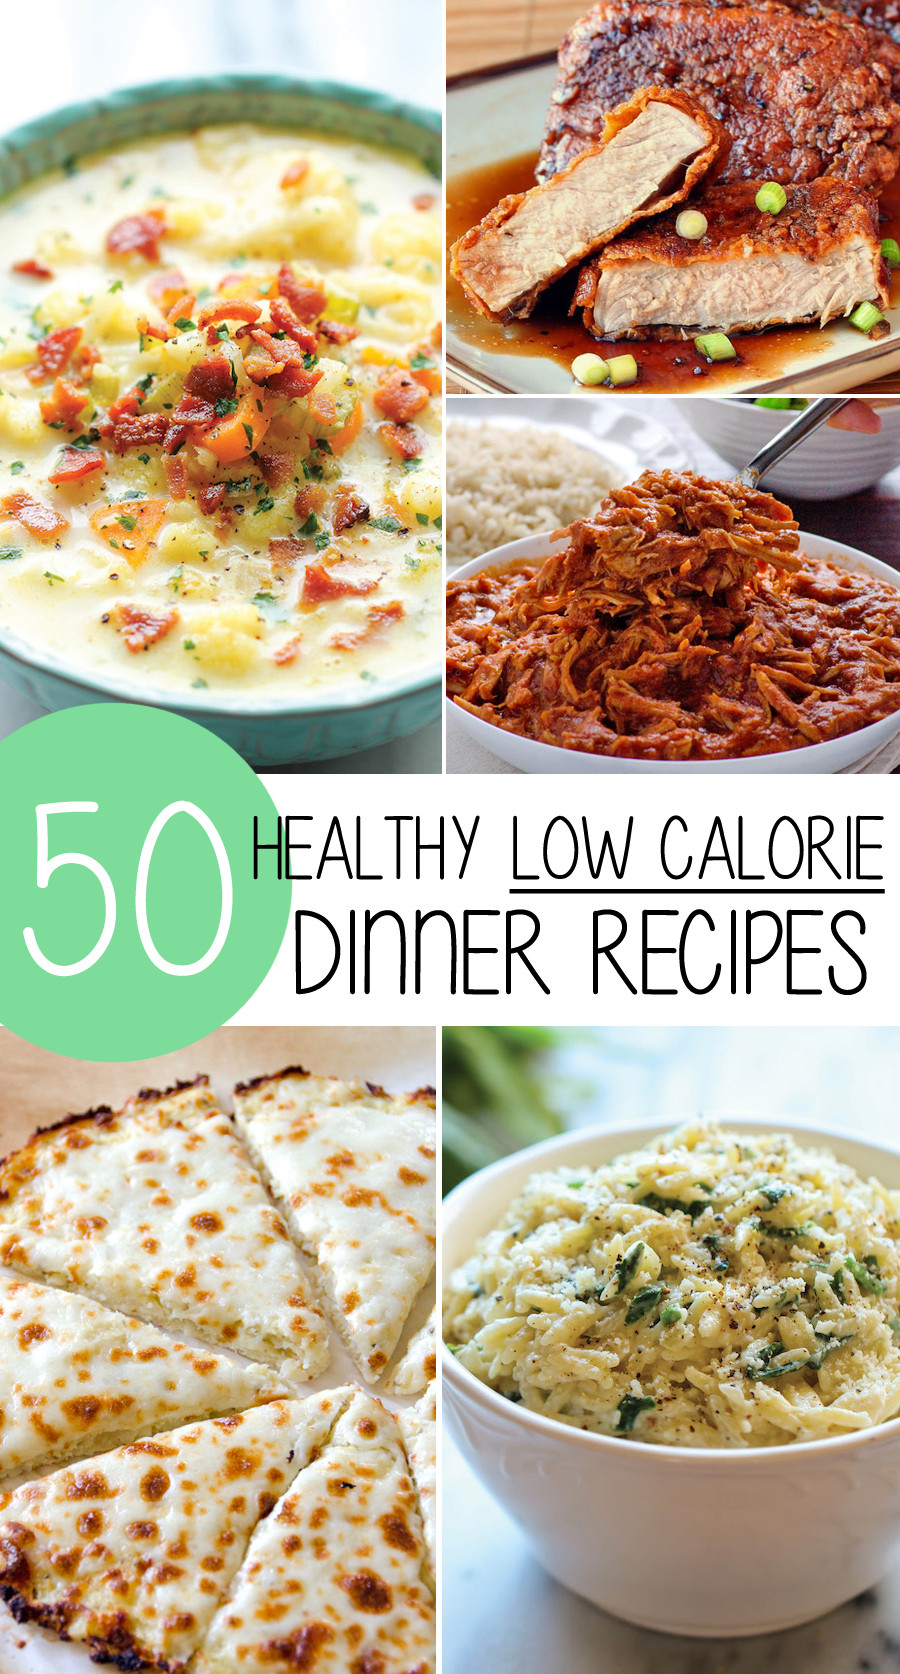 Low Fat Diet Recipes Weightloss
 50 Healthy Low Calorie Weight Loss Dinner Recipes